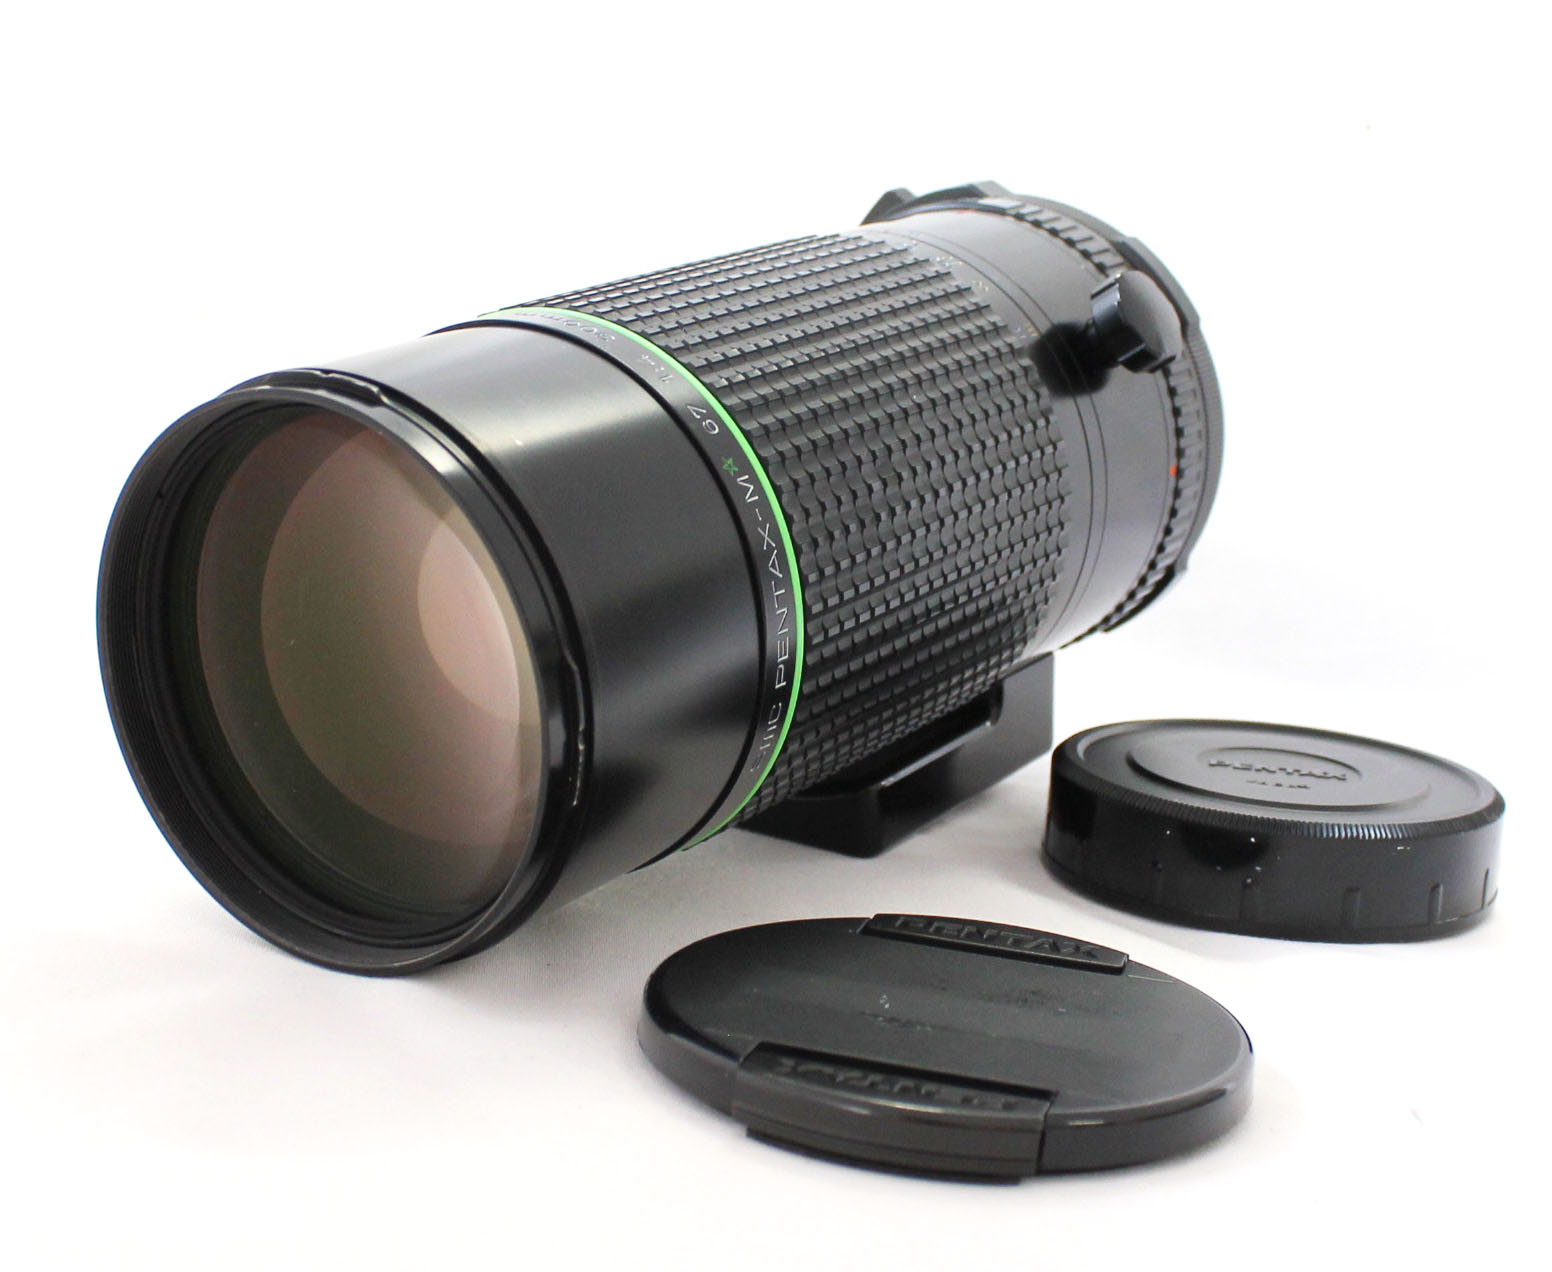 SMC Pentax-M* 67 300mm F/4 ED IF Green Star Lens for 6x7 67 II from Japan Photo 0